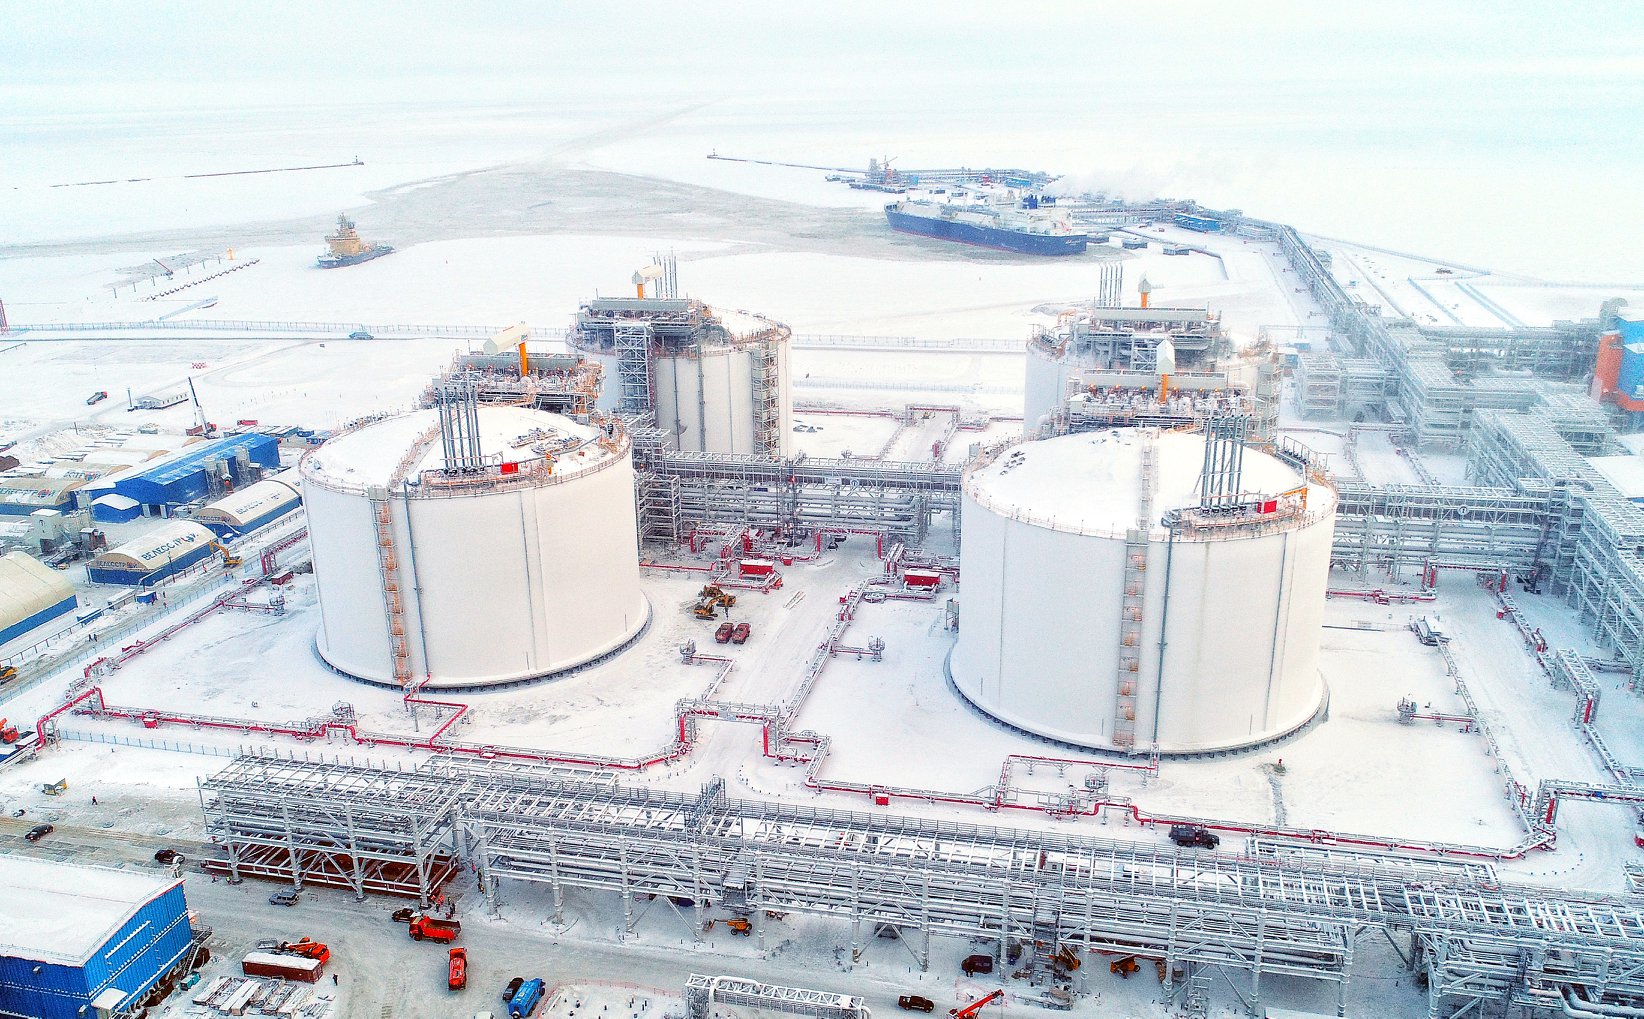 Exclusive interview: Russia's Novatek aiming for top LNG exporters club